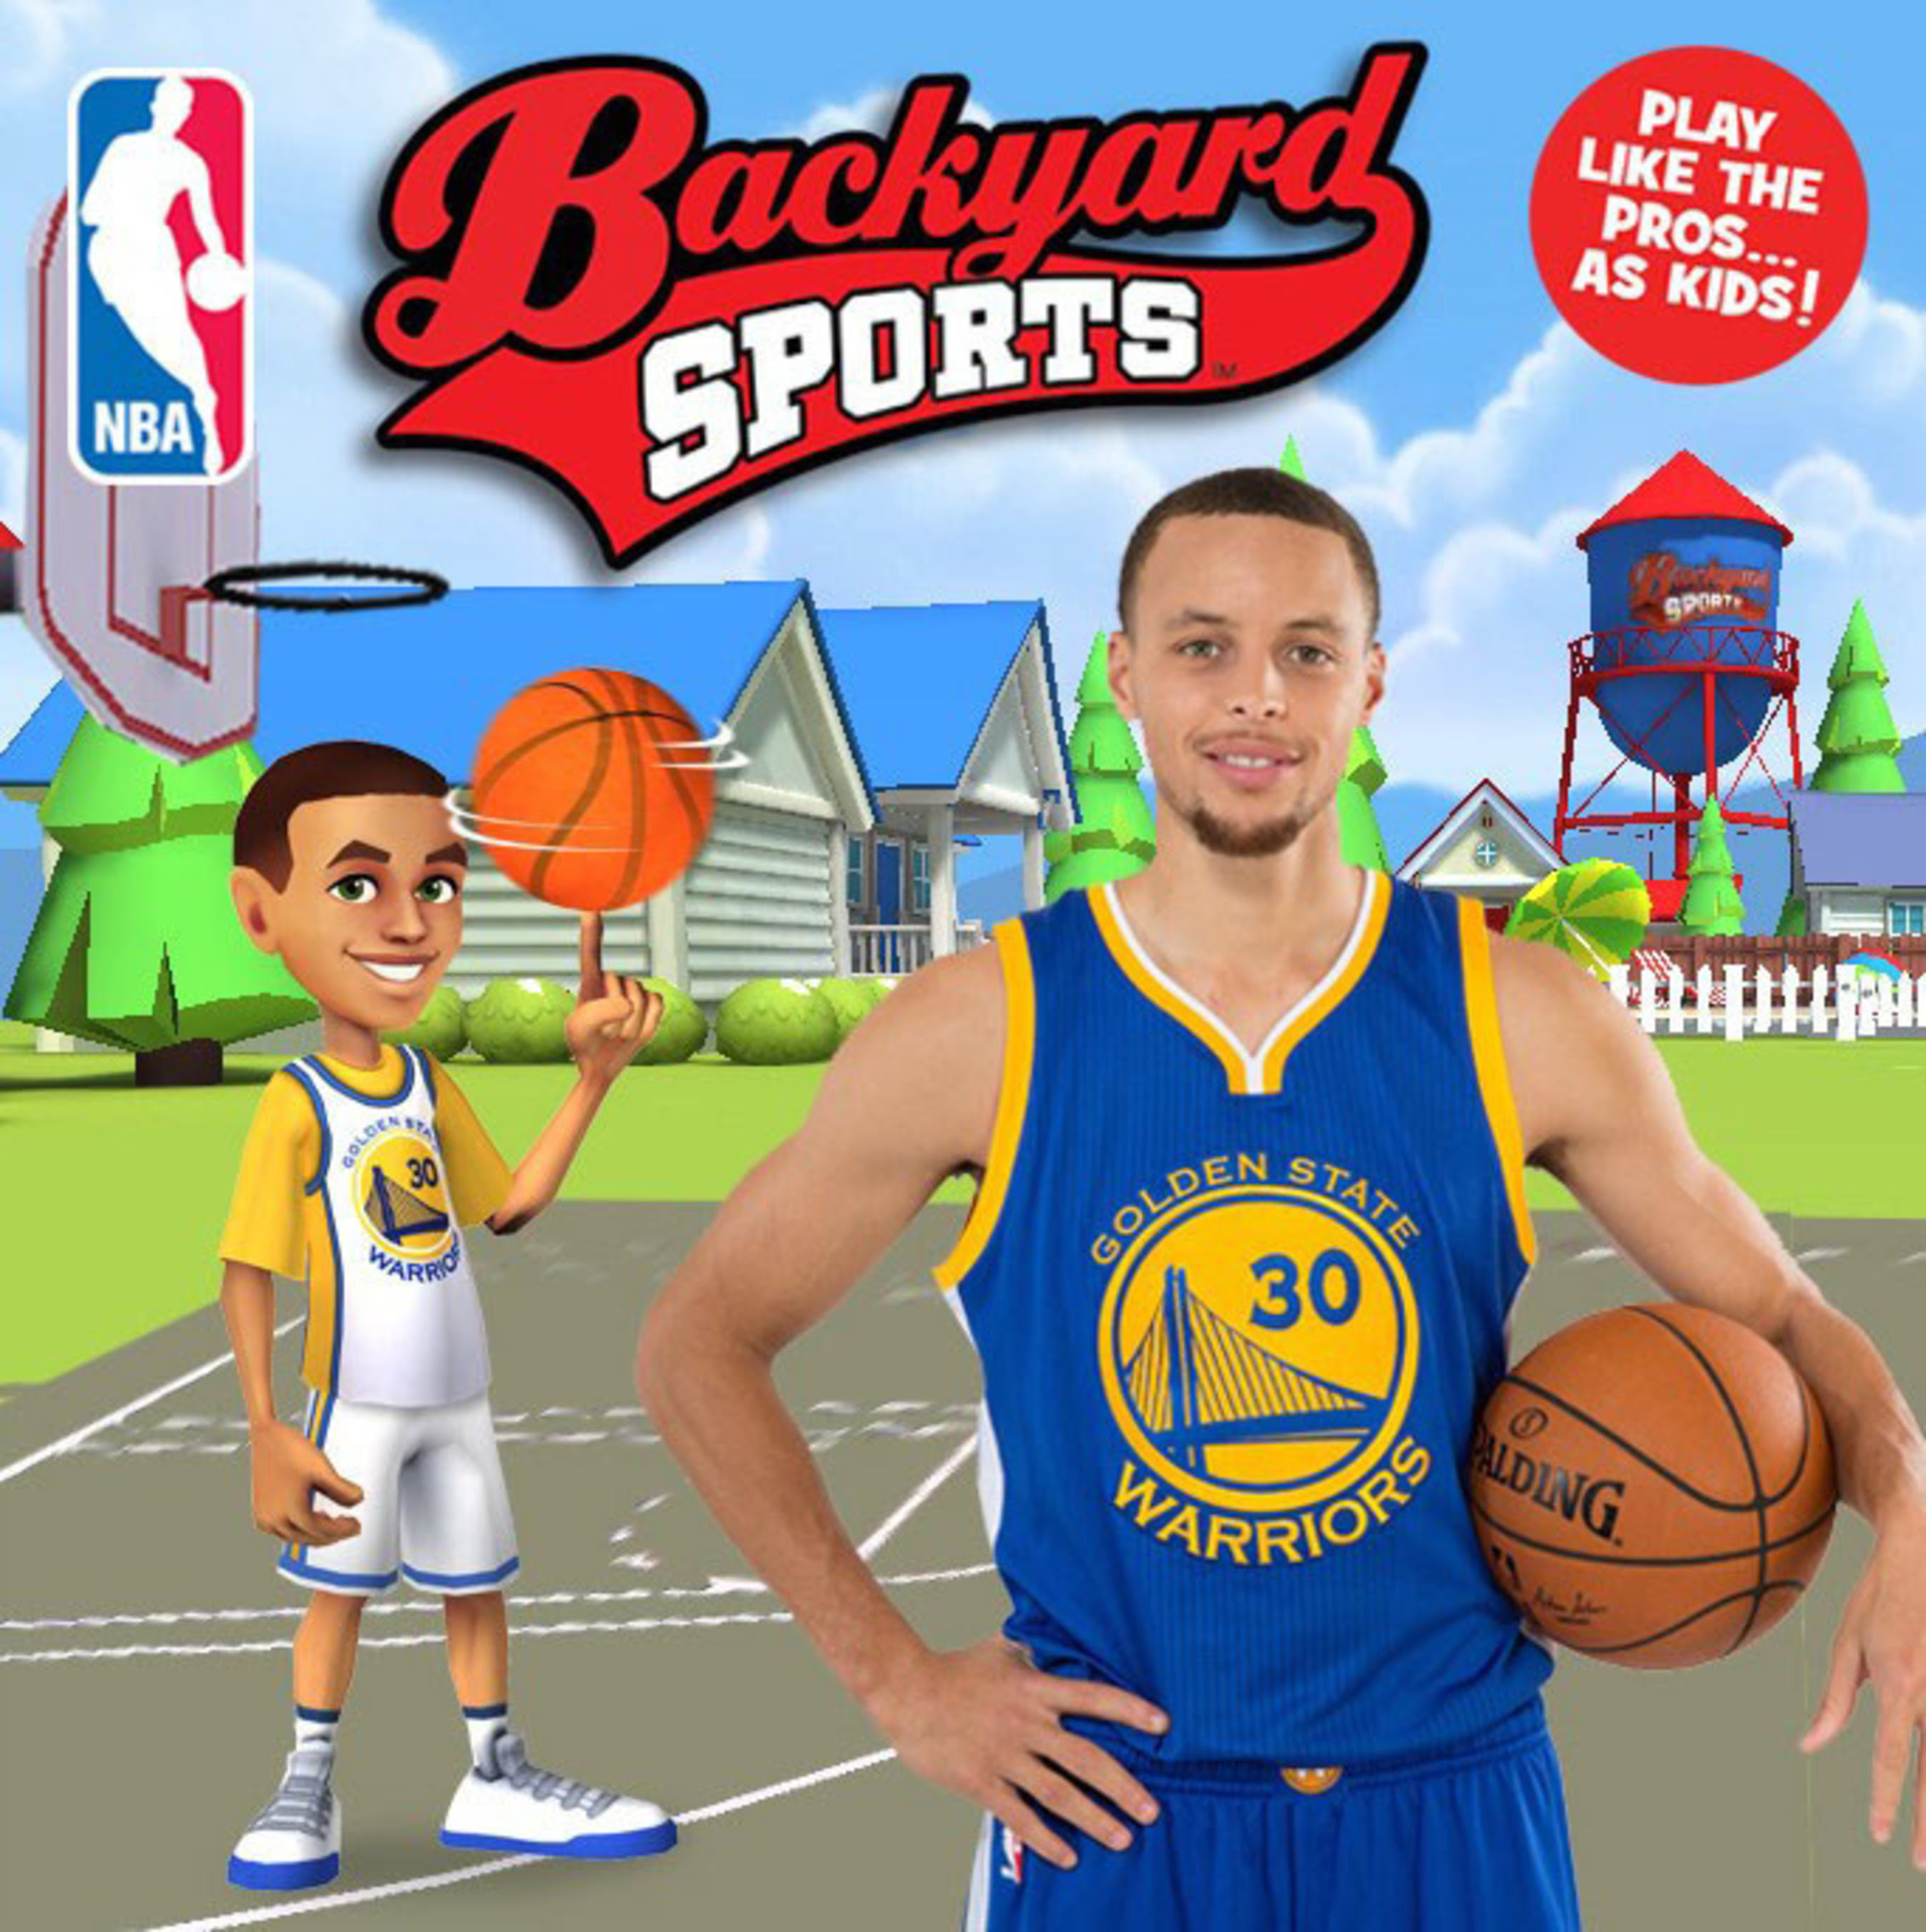 Day 6 Sports Group Teams With Nba To Re Launch Backyard Sports Franchise